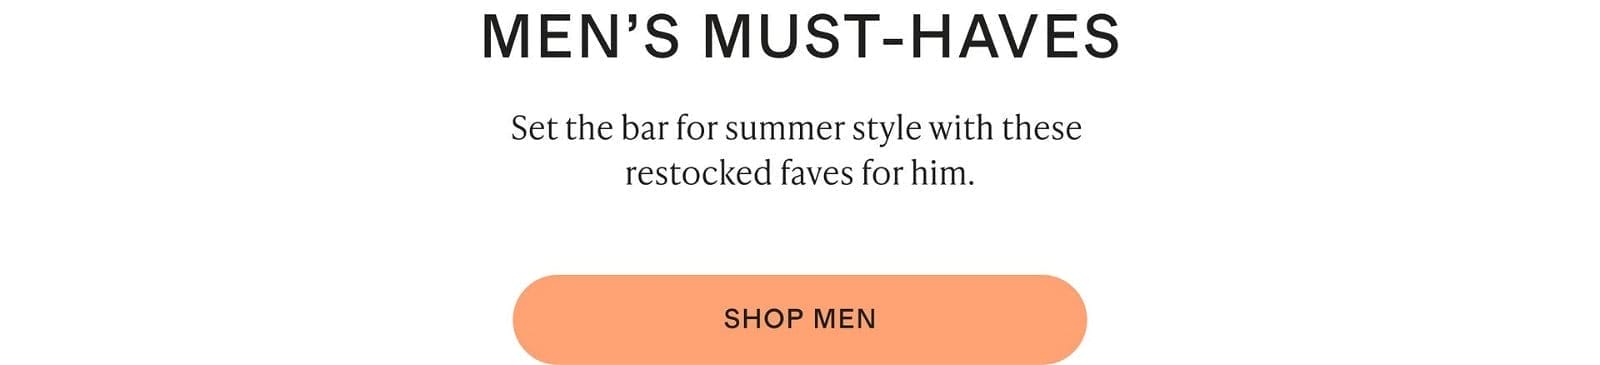 MEN’S MUST-HAVES